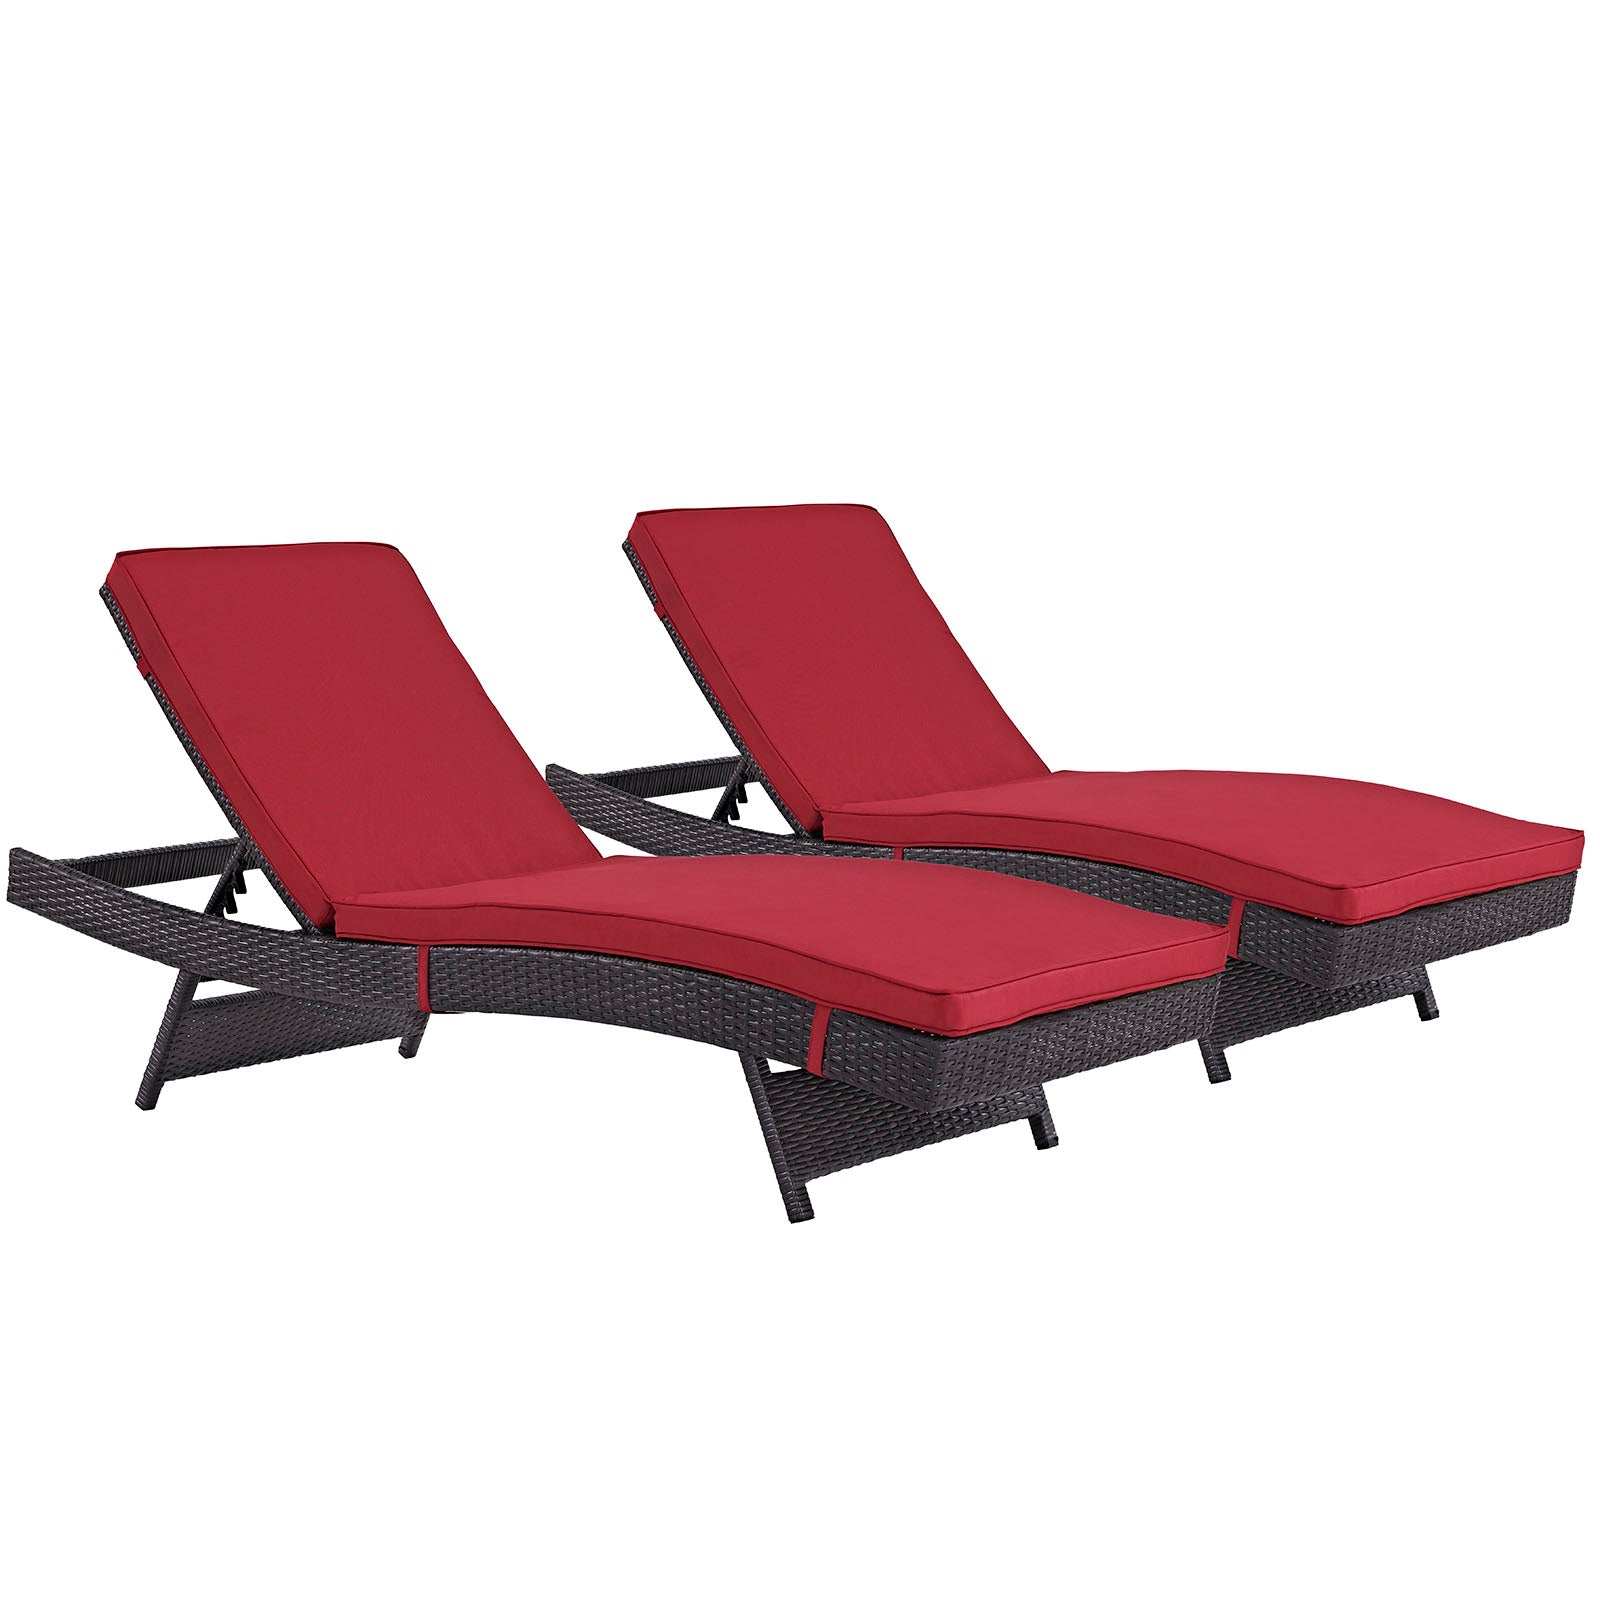 Modway Outdoor Loungers - Convene Chaise Outdoor Patio Set of 2 Espresso Red